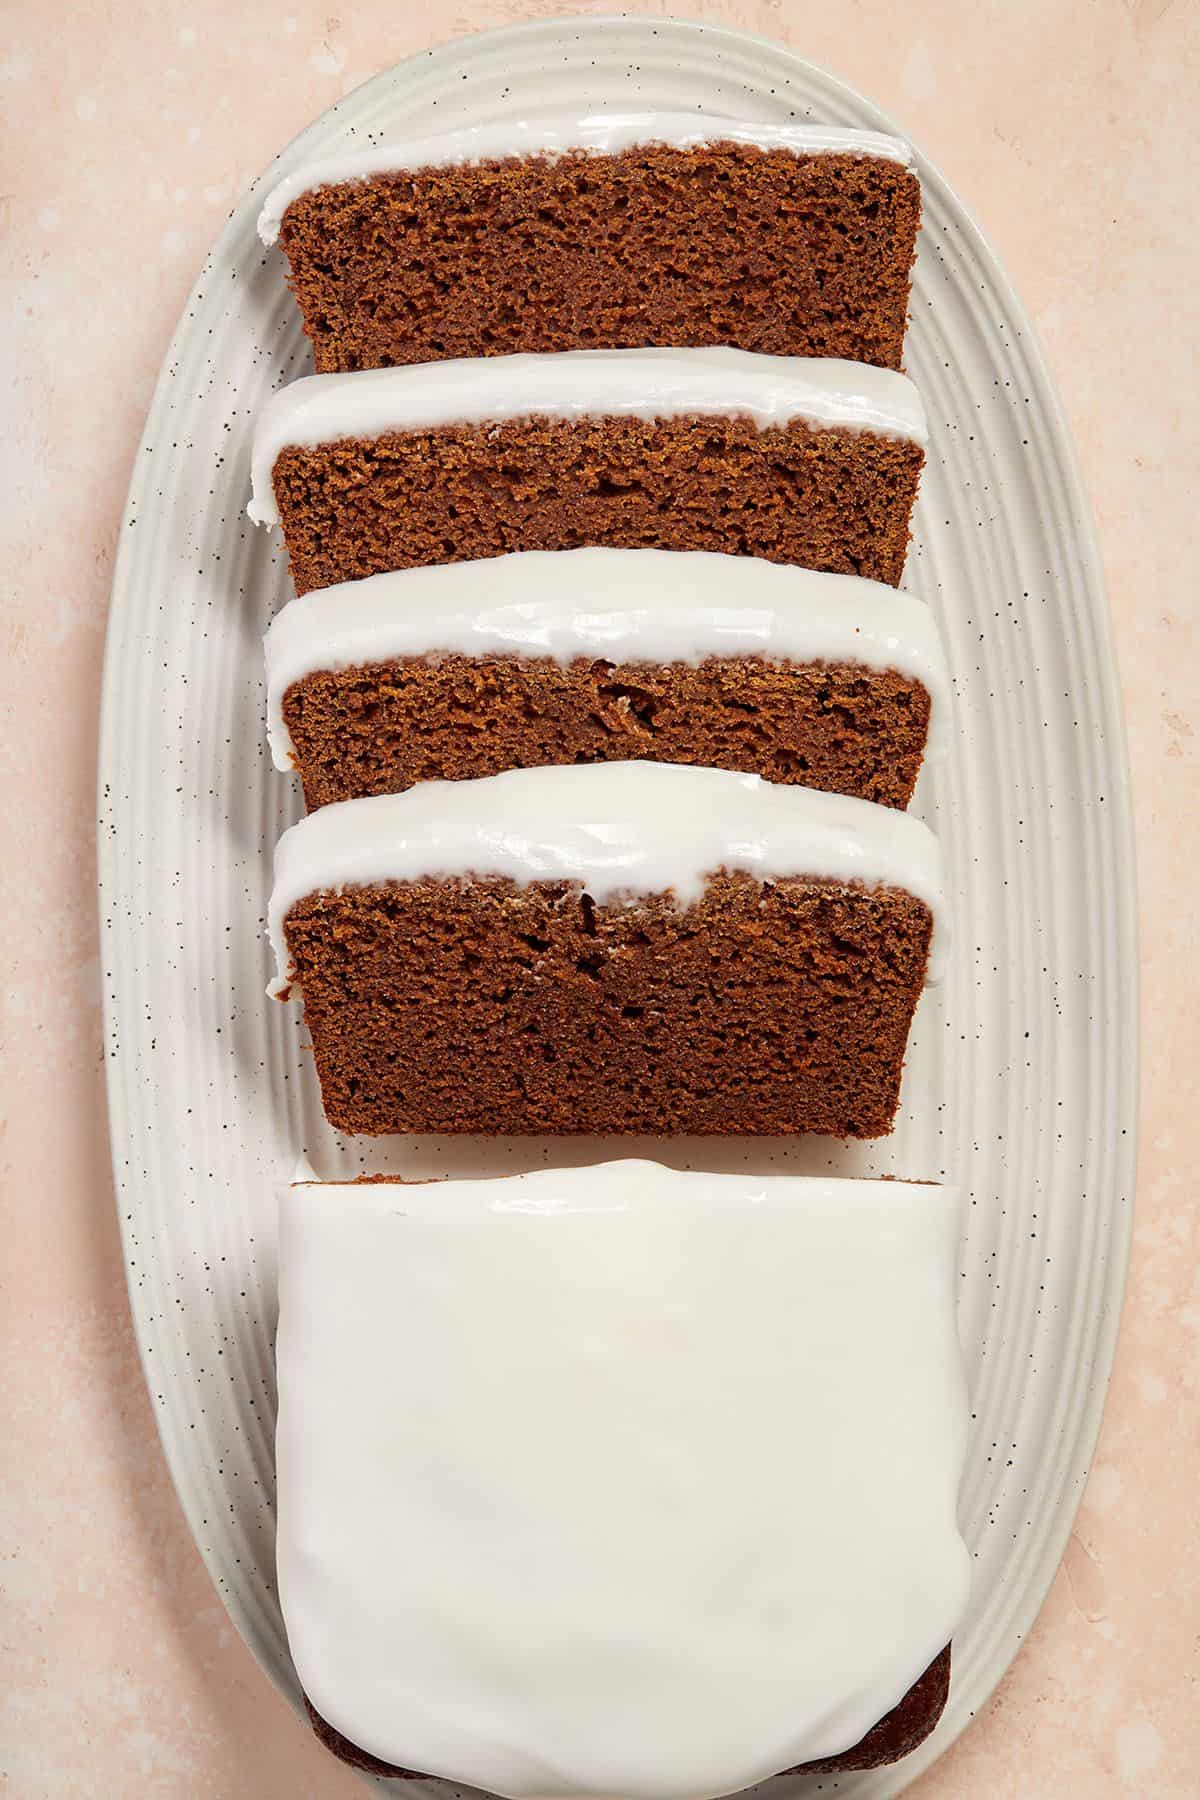 Slices of gingerbread loaf and half a loaf, sitting on a white oval dish.